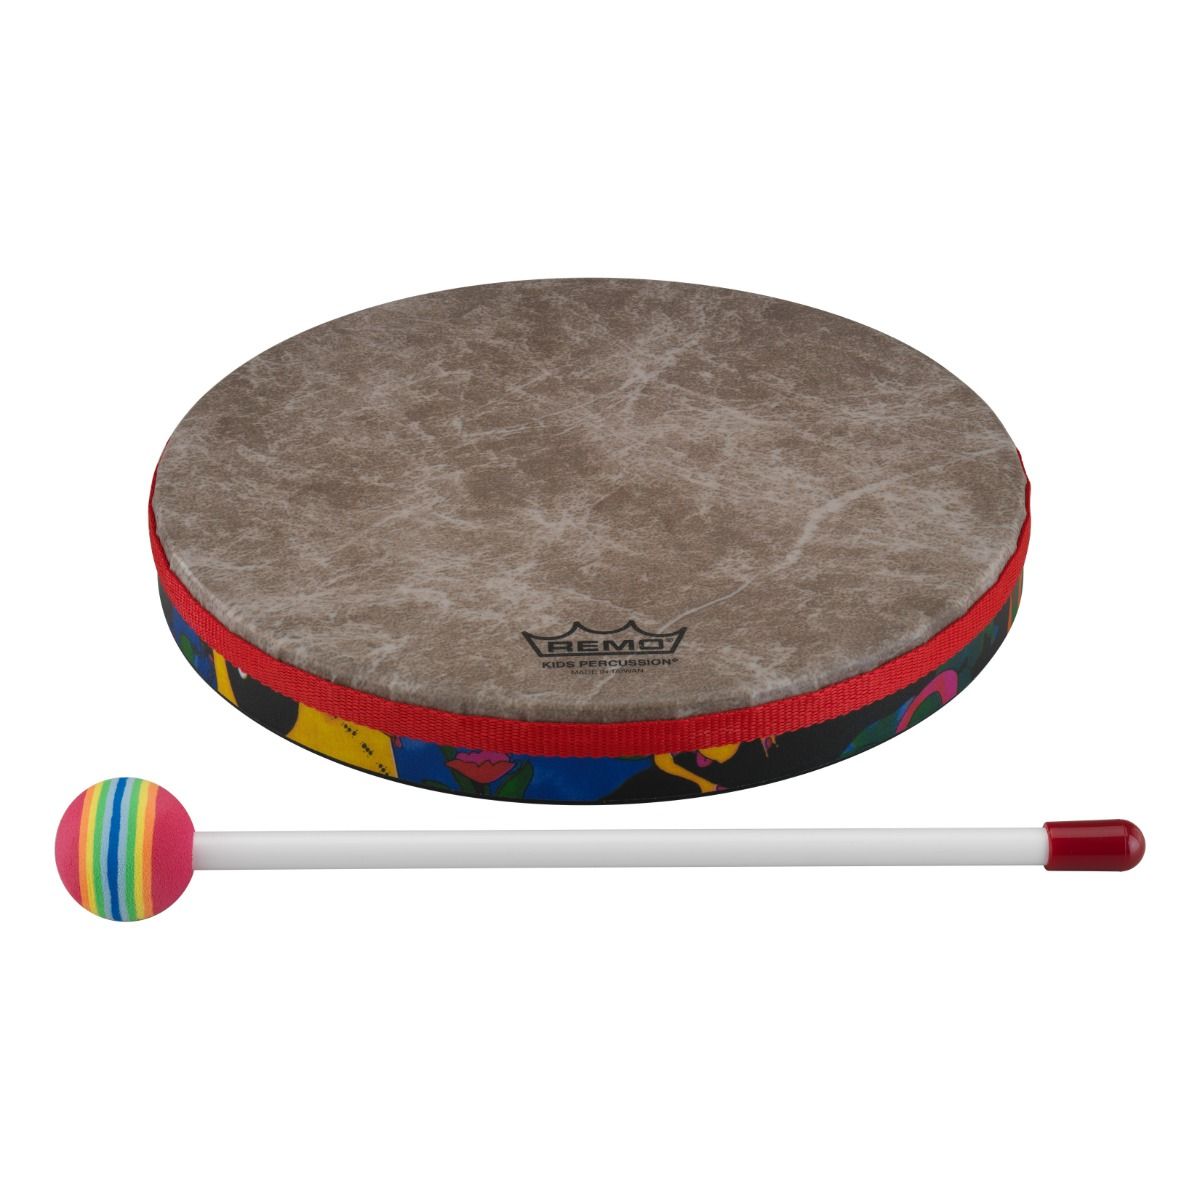 REMO Kid's Hand Drum with Mallet - E152 (5 sizes)